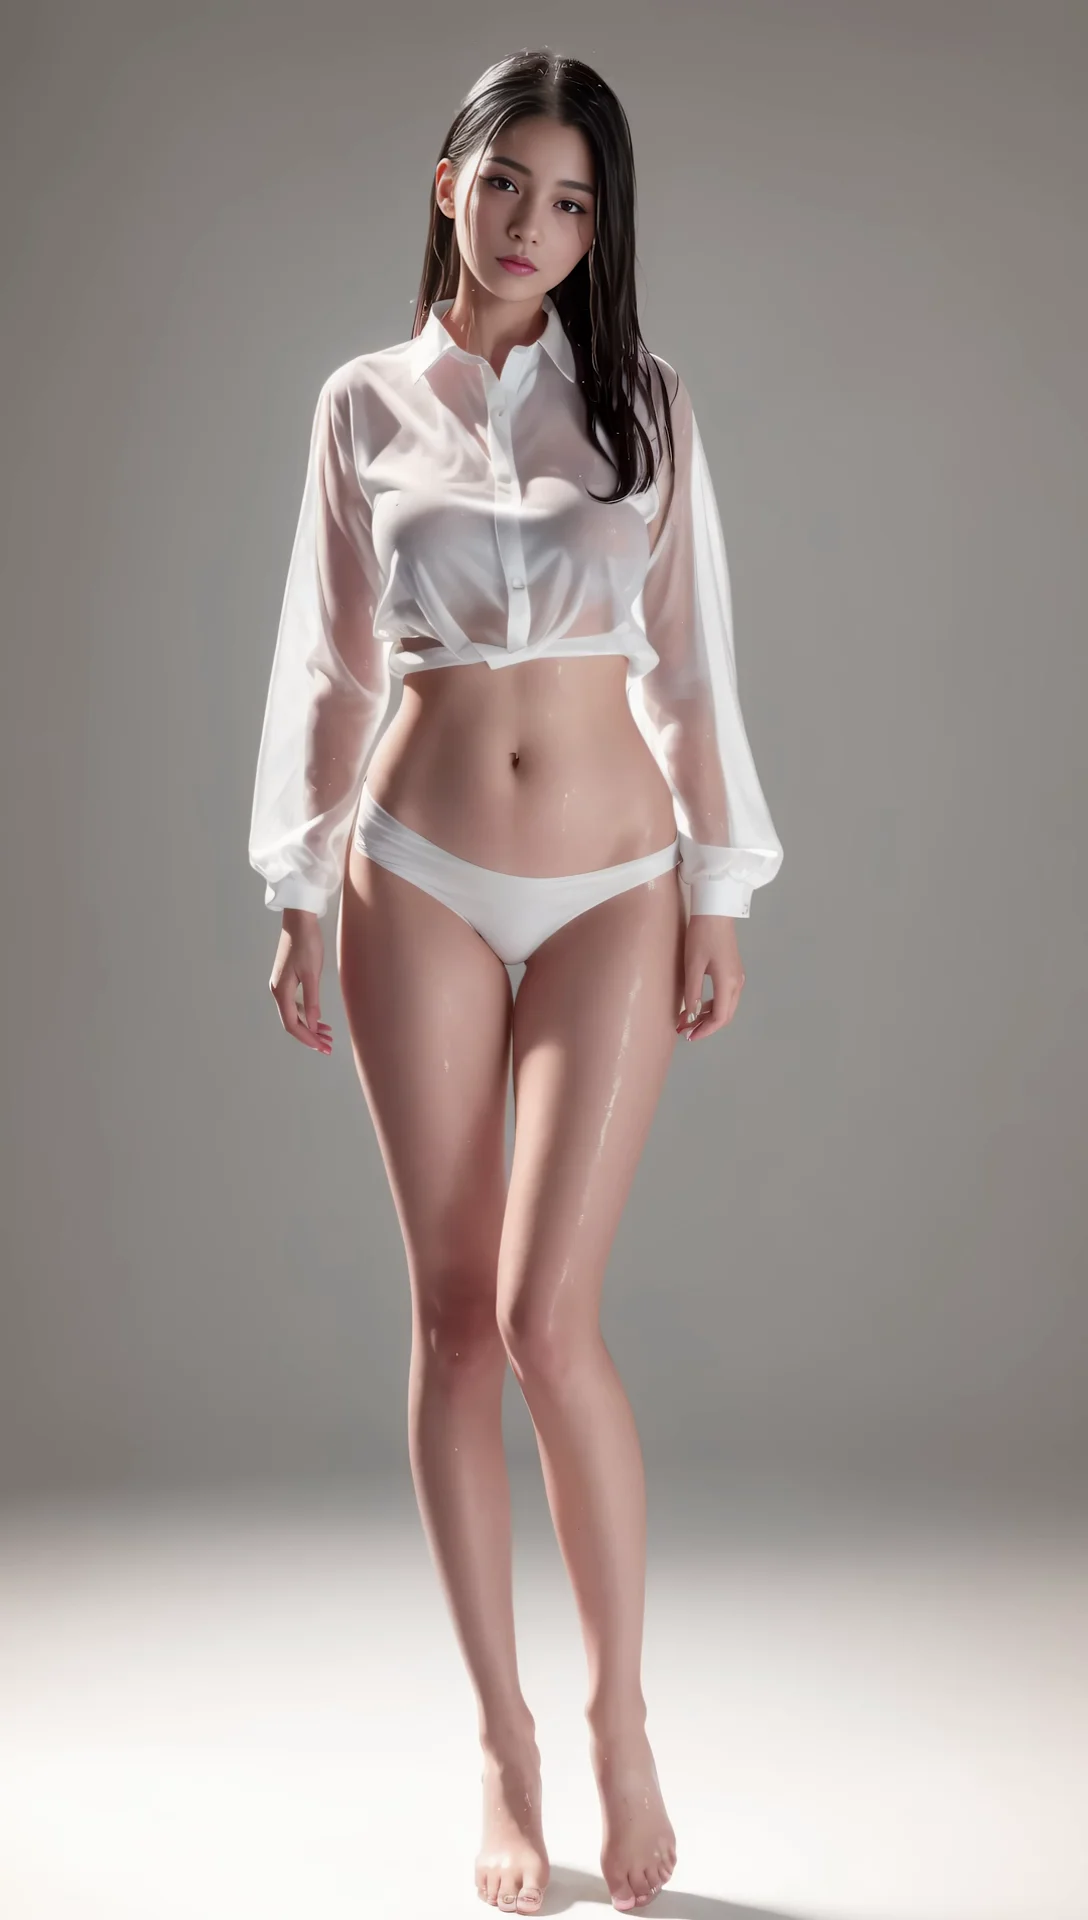 Ai Lookbook Beautiful Girl In A White Shirt And Panties Image 21